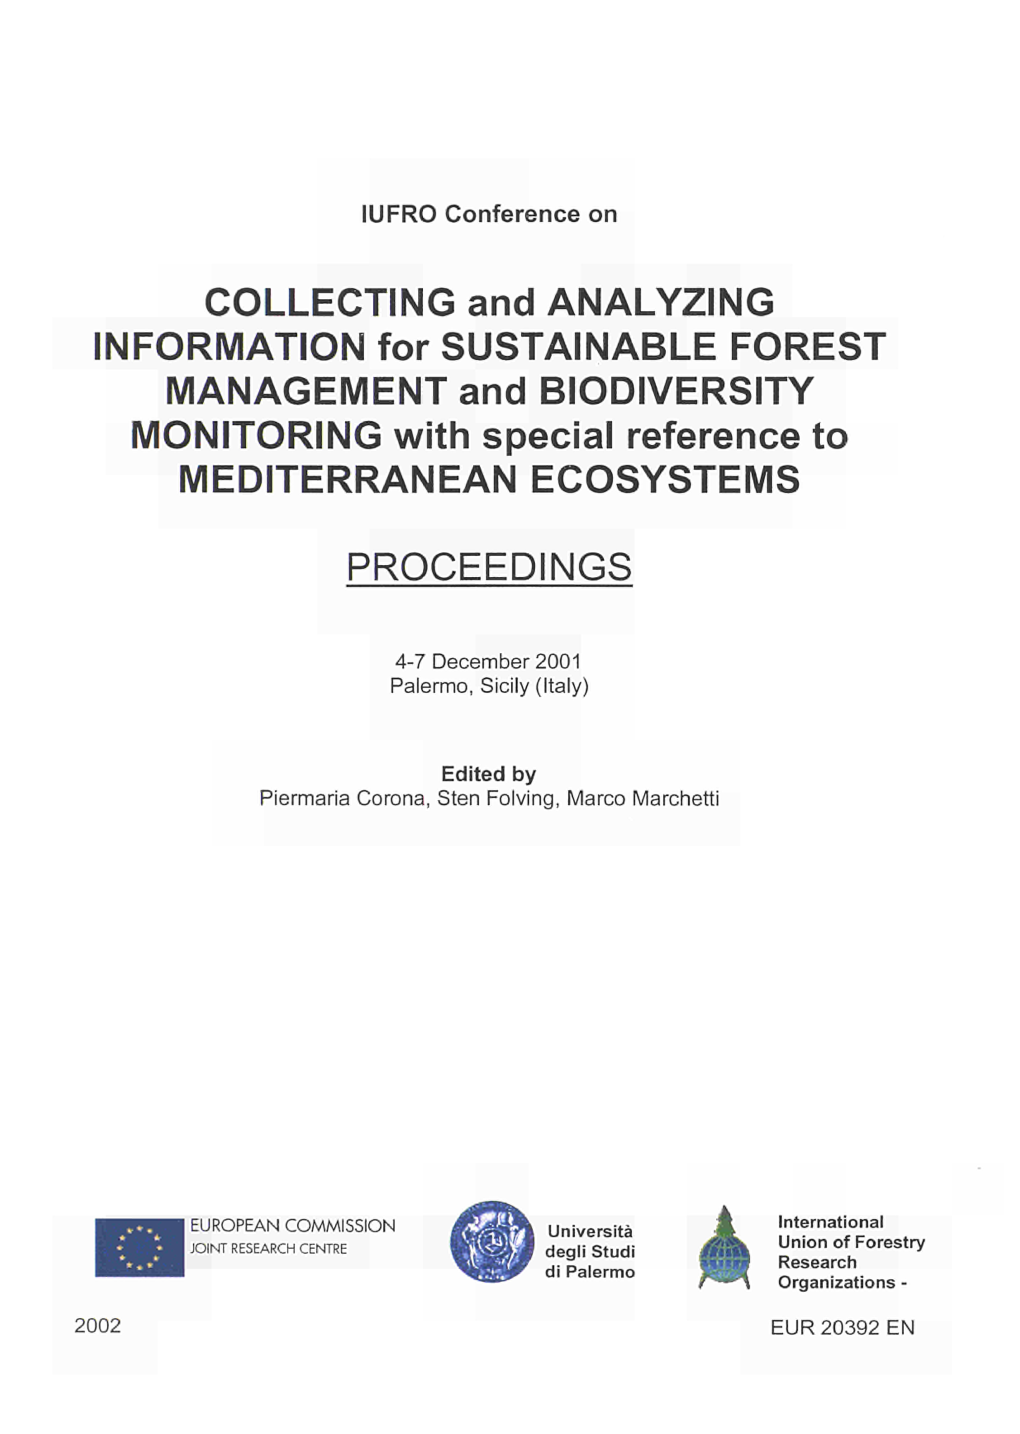 COLLECTING and ANALYZING INFORMATION for SUSTAINABLE FOREST MANAGEMENT and BIODIVERSITY MONITORING with Special Reference to MEDITERRANEAN ECOSYSTEMS